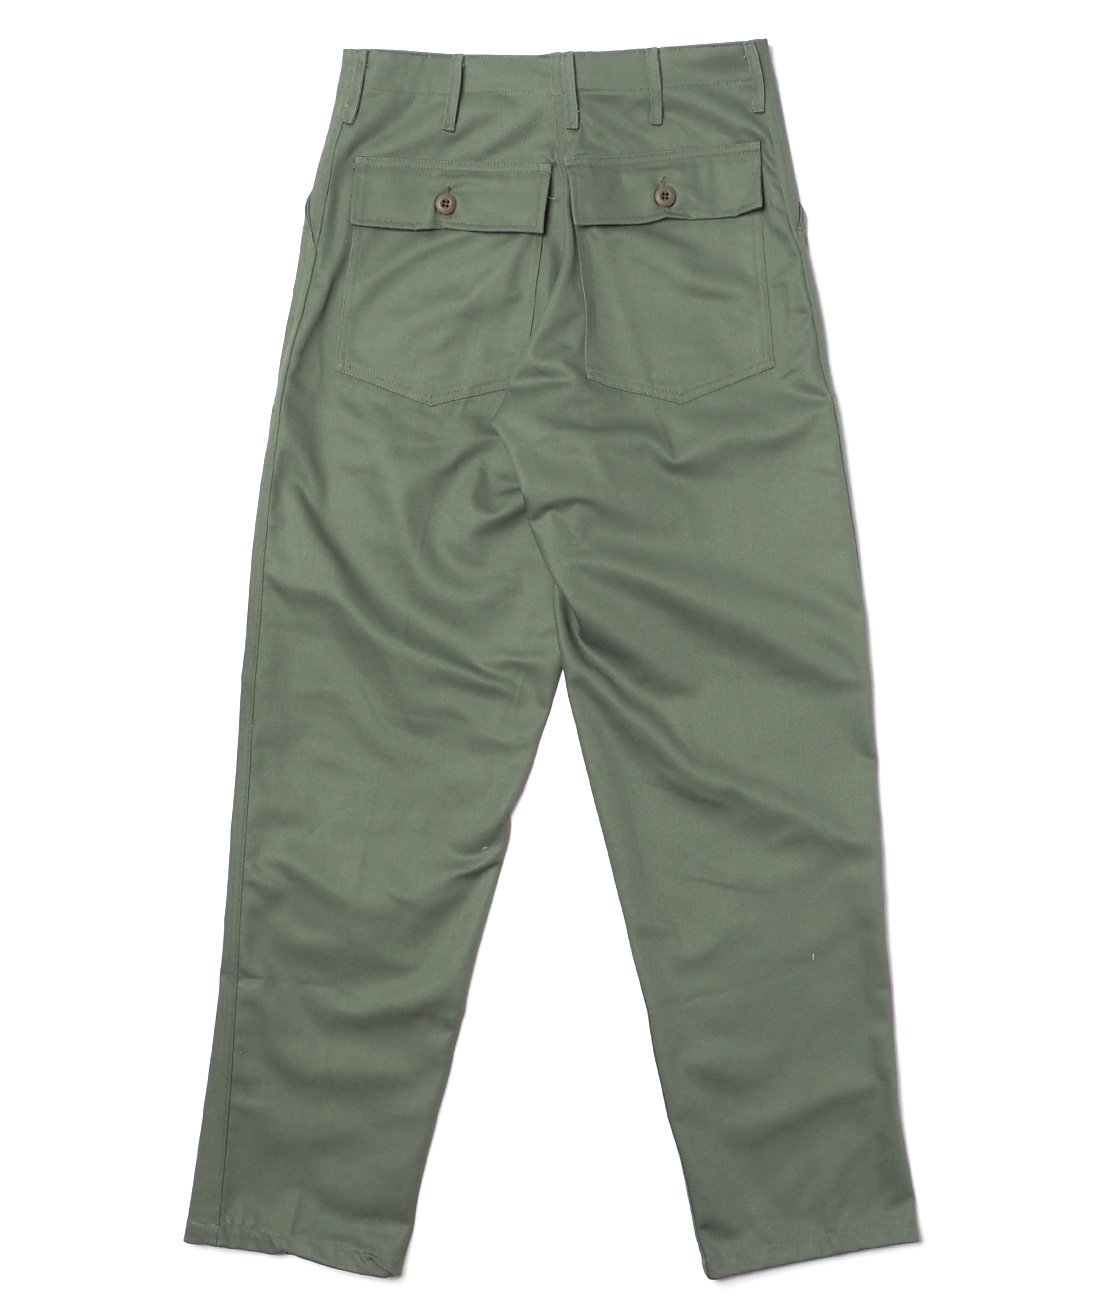 DEAD STOCK】US ARMY UTILITY TROUSERS - OLIVE GREEN 米軍 ベイカー 